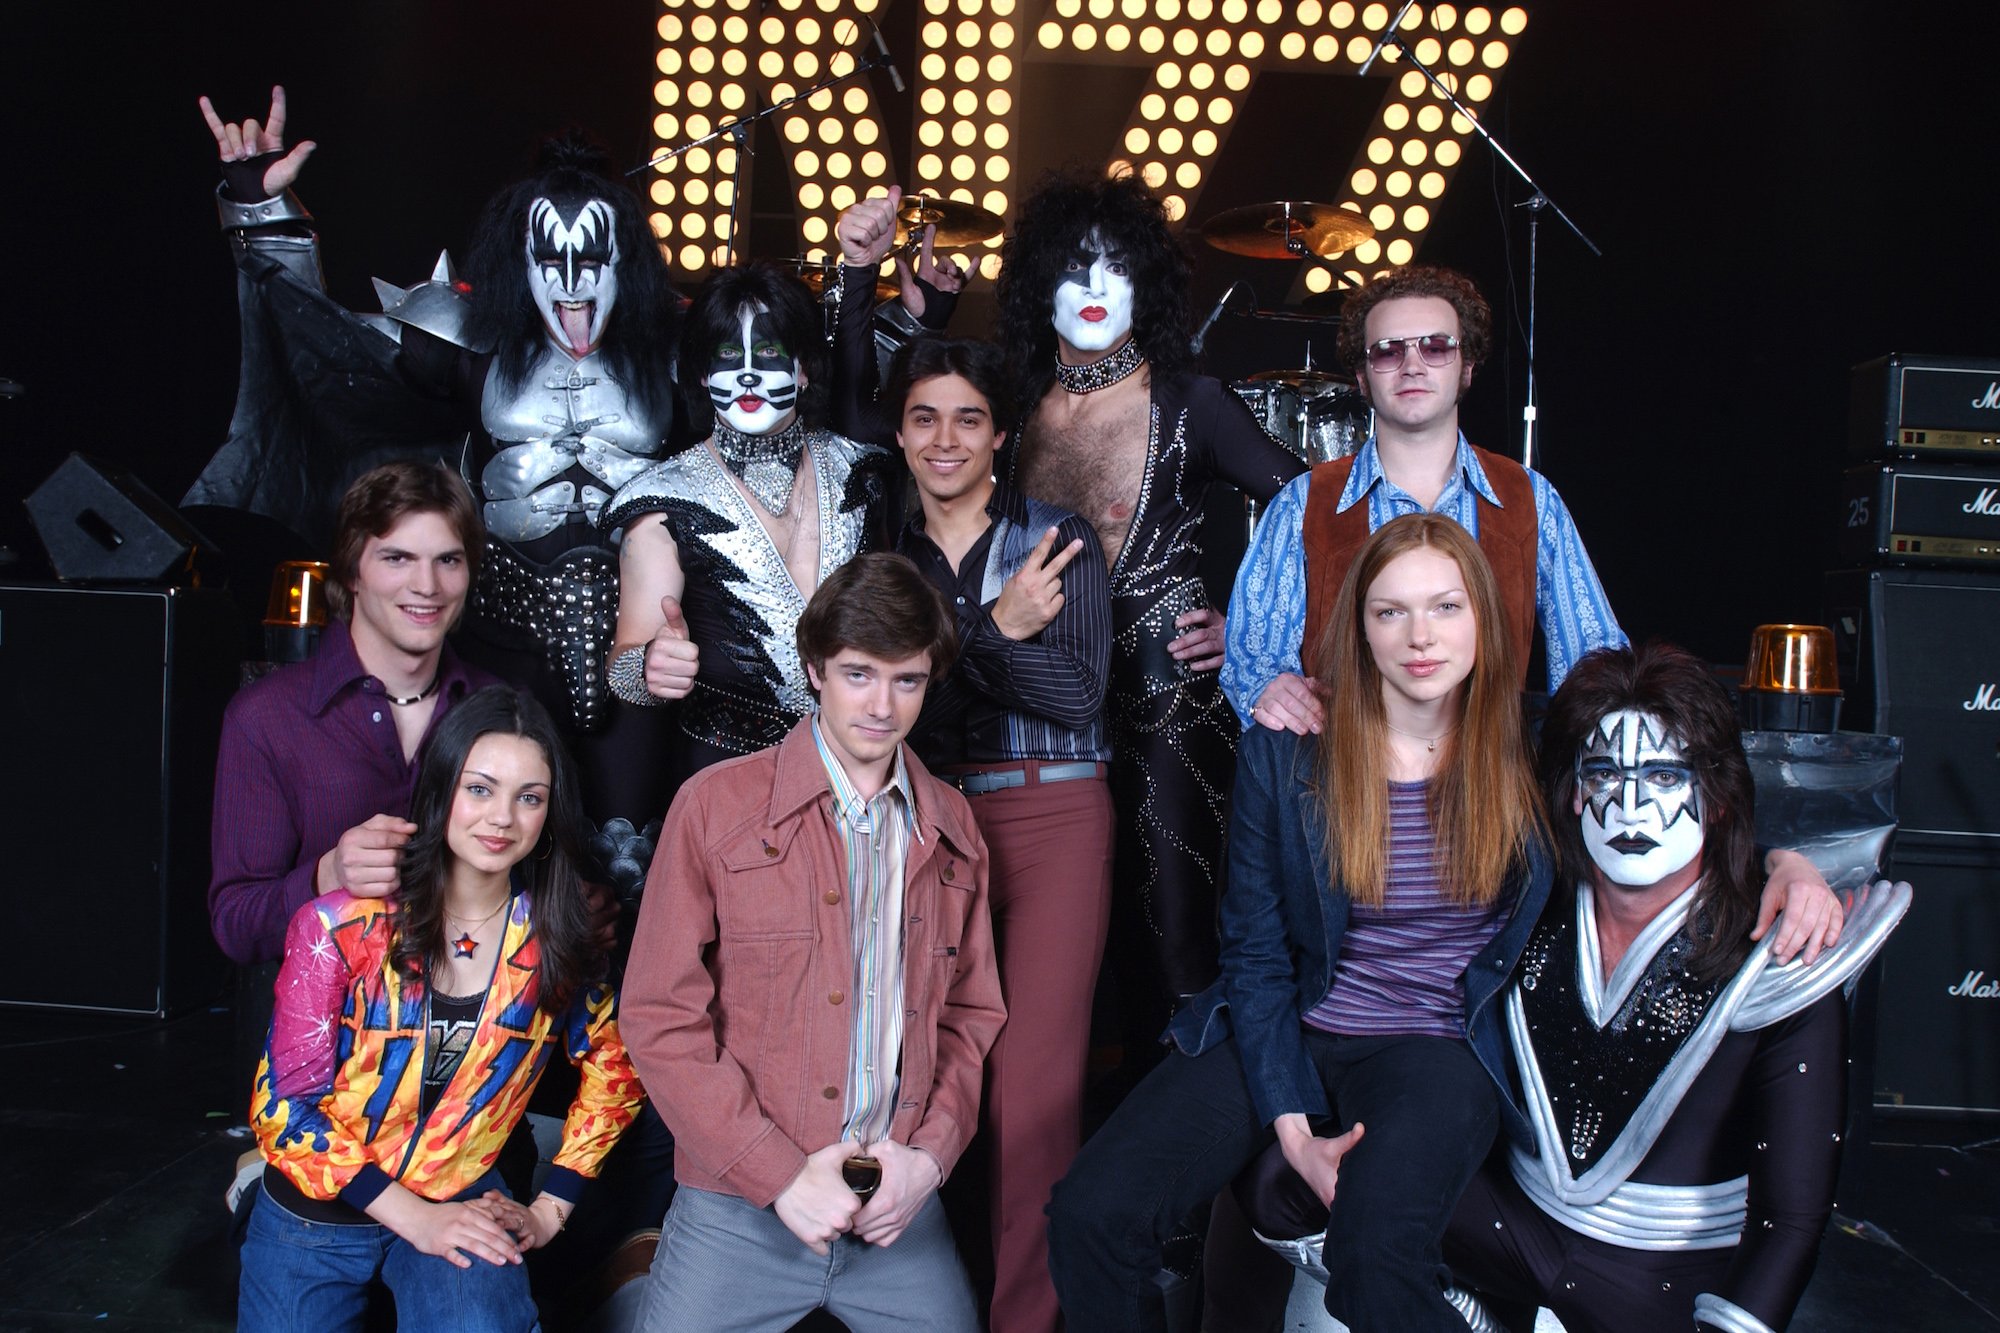 The cast from 'That 70s Show' posing with the rock band Kiss